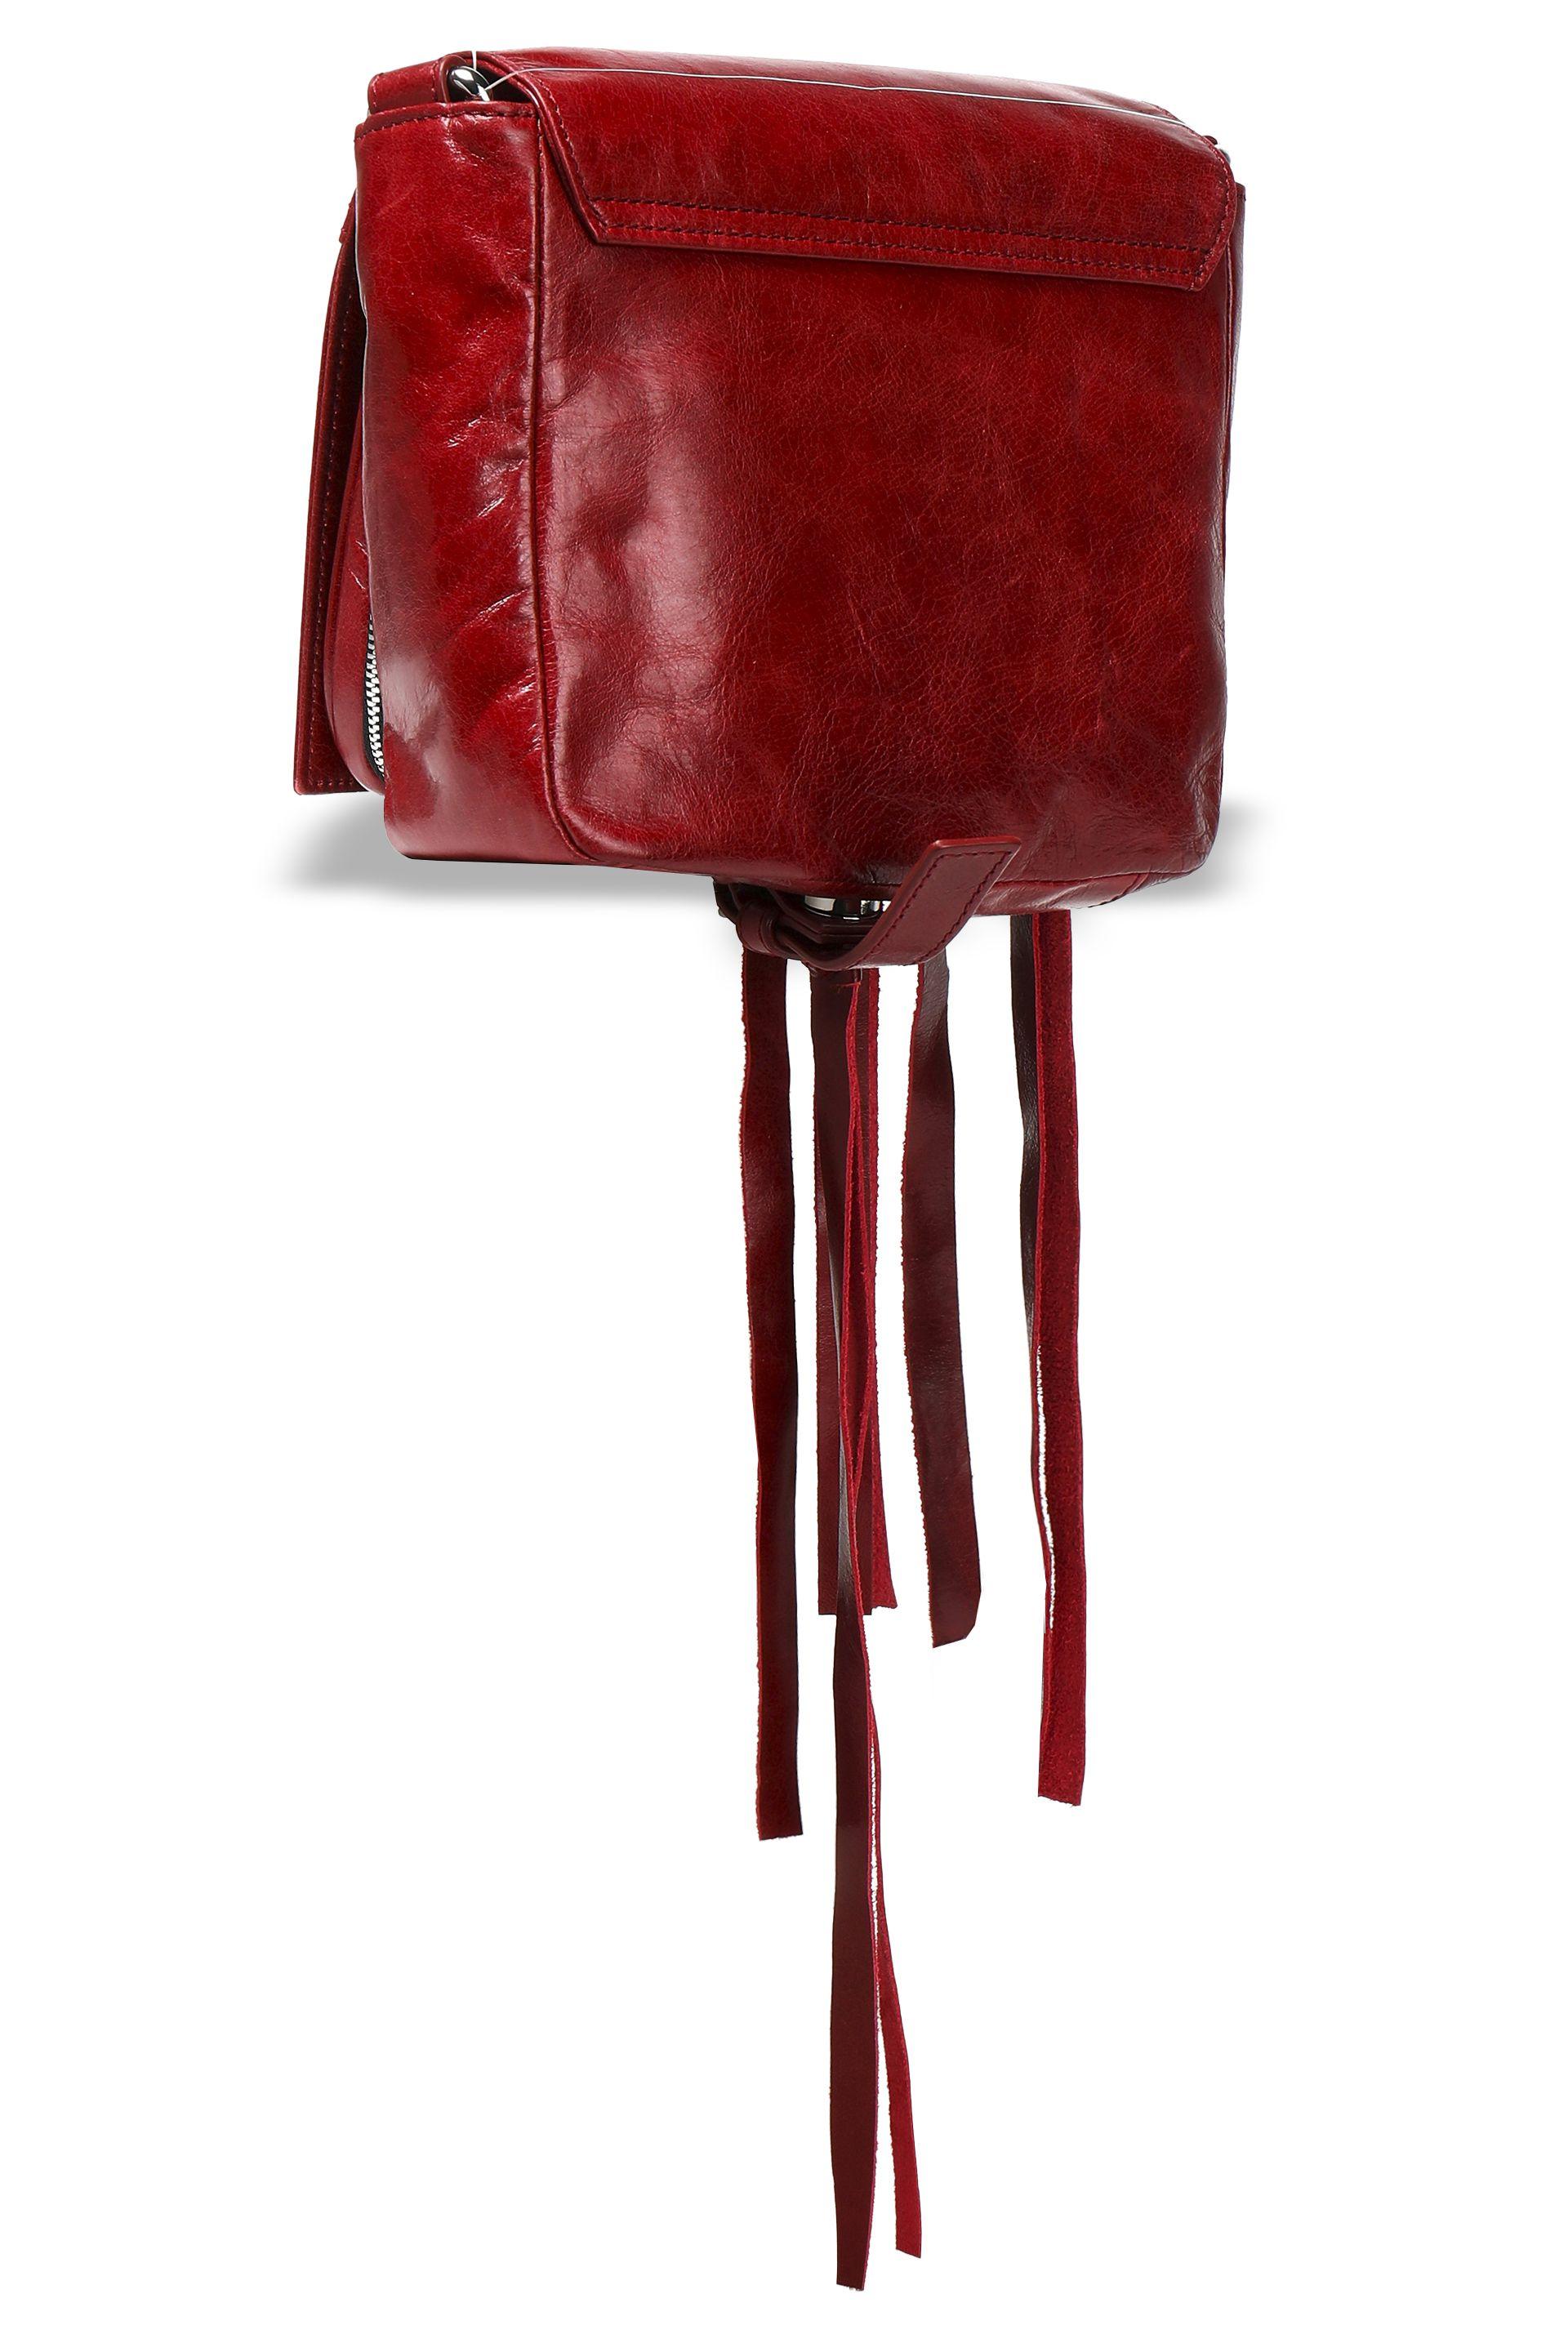 McQ Woman Leather Shoulder Bag Brick in Red - Lyst